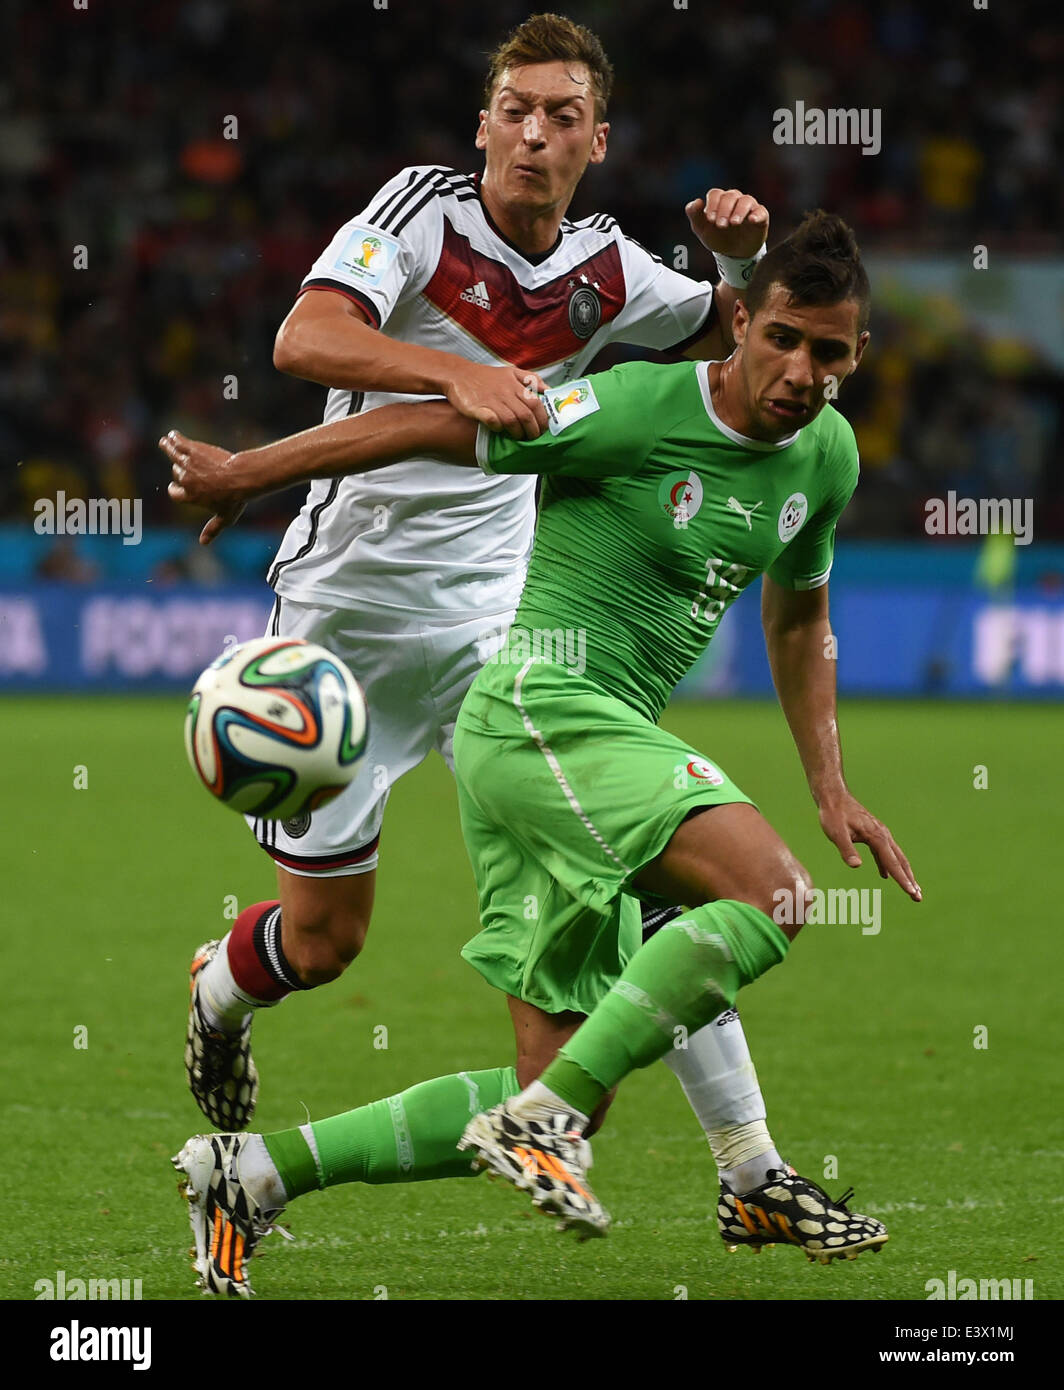 Porto Alegre, Brazil. 30th June, 2014. Algeria's Saphir Taider (R) vies with Germany's Mesut Ozil during a Round of 16 match between Germany and Algeria of 2014 FIFA World Cup at the Estadio Beira-Rio Stadium in Porto Alegre, Brazil, on June 30, 2014. Credit:  Li Ga/Xinhua/Alamy Live News Stock Photo